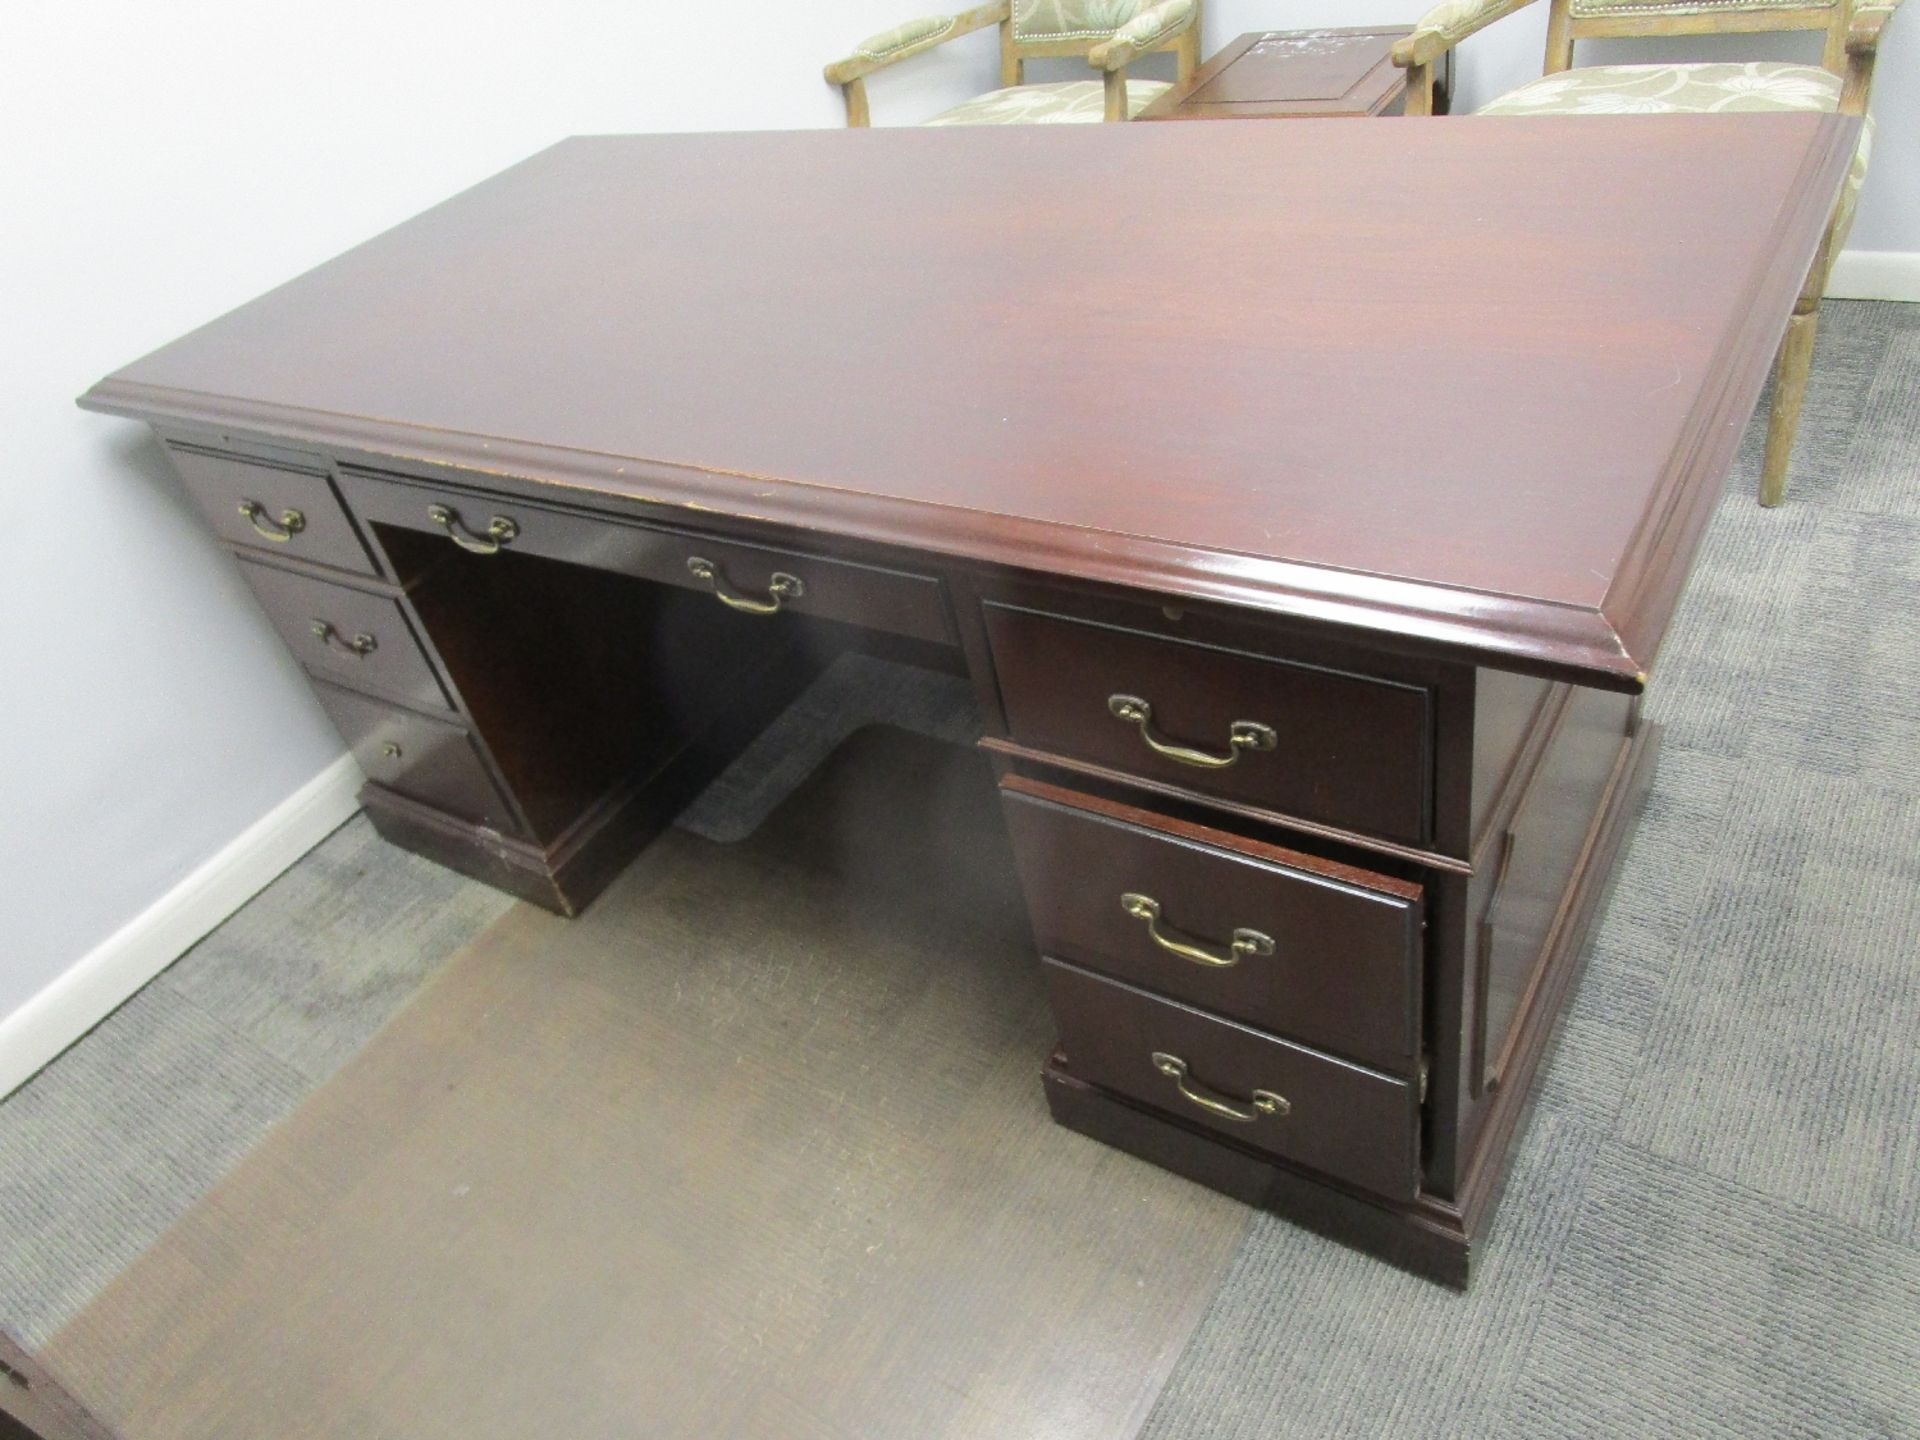 Lot of Executive Office Furniture - Image 4 of 5